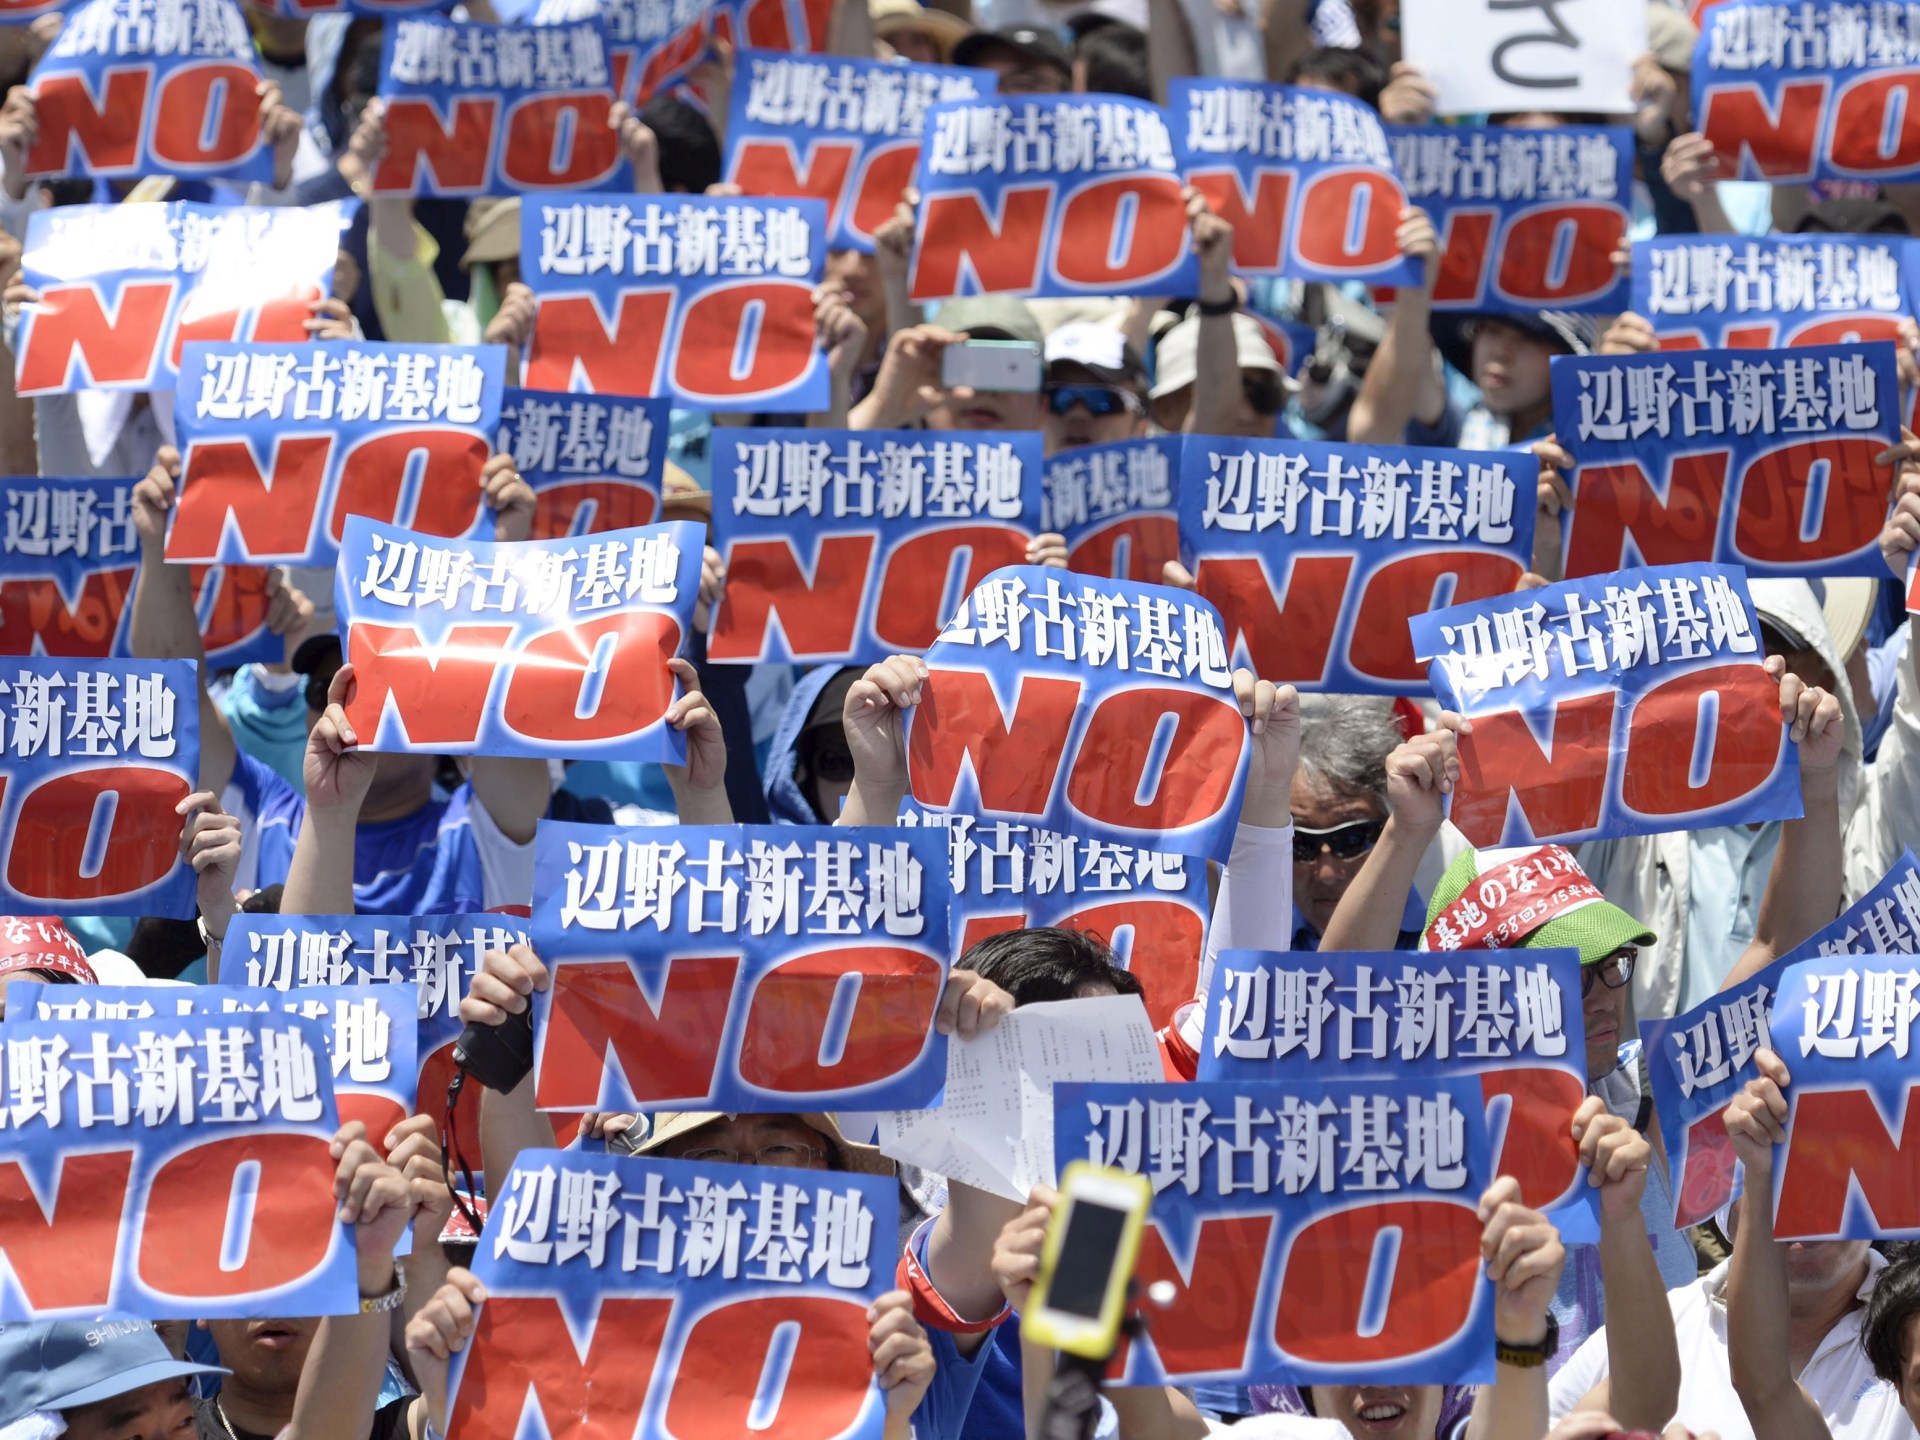 Japan protests alleged sex assault cases involving US military in Okinawa | Military News